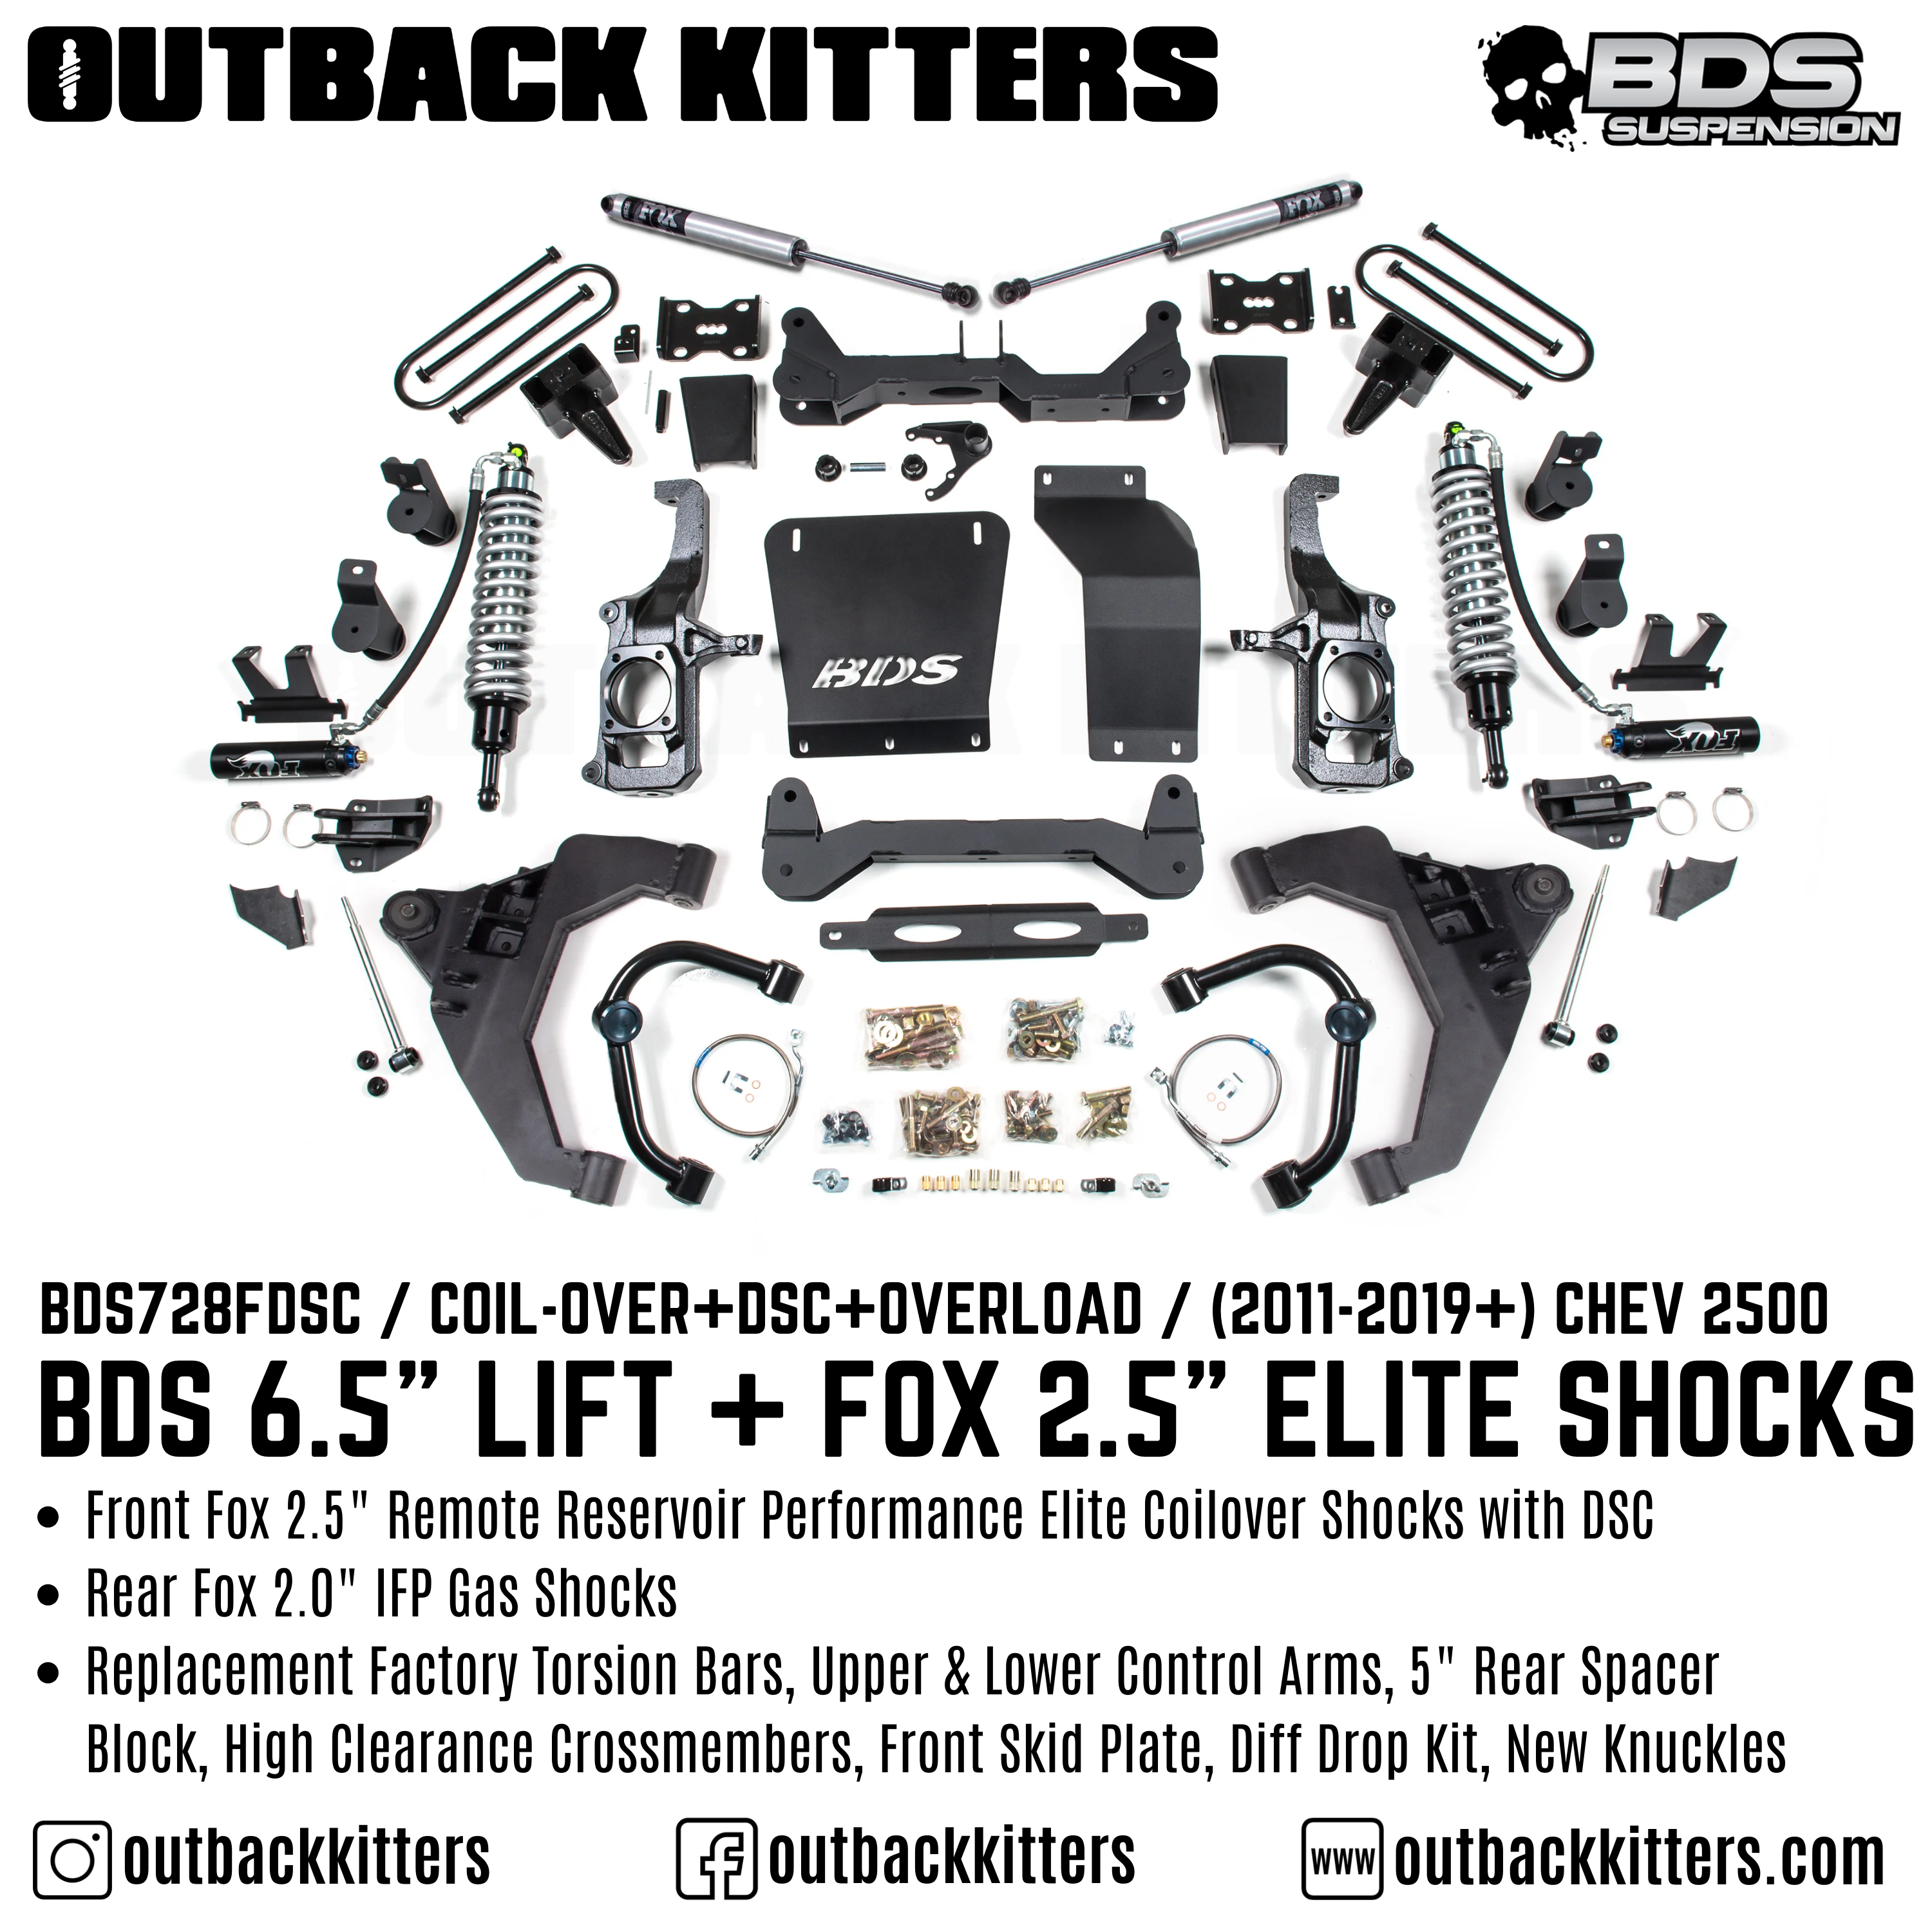 BDS Suspension 6.5" Lift Kit for 2011-2019 Chevy Silverado 2500 with Fox 2.5 Performance Elite Shocks - Outback Kitters